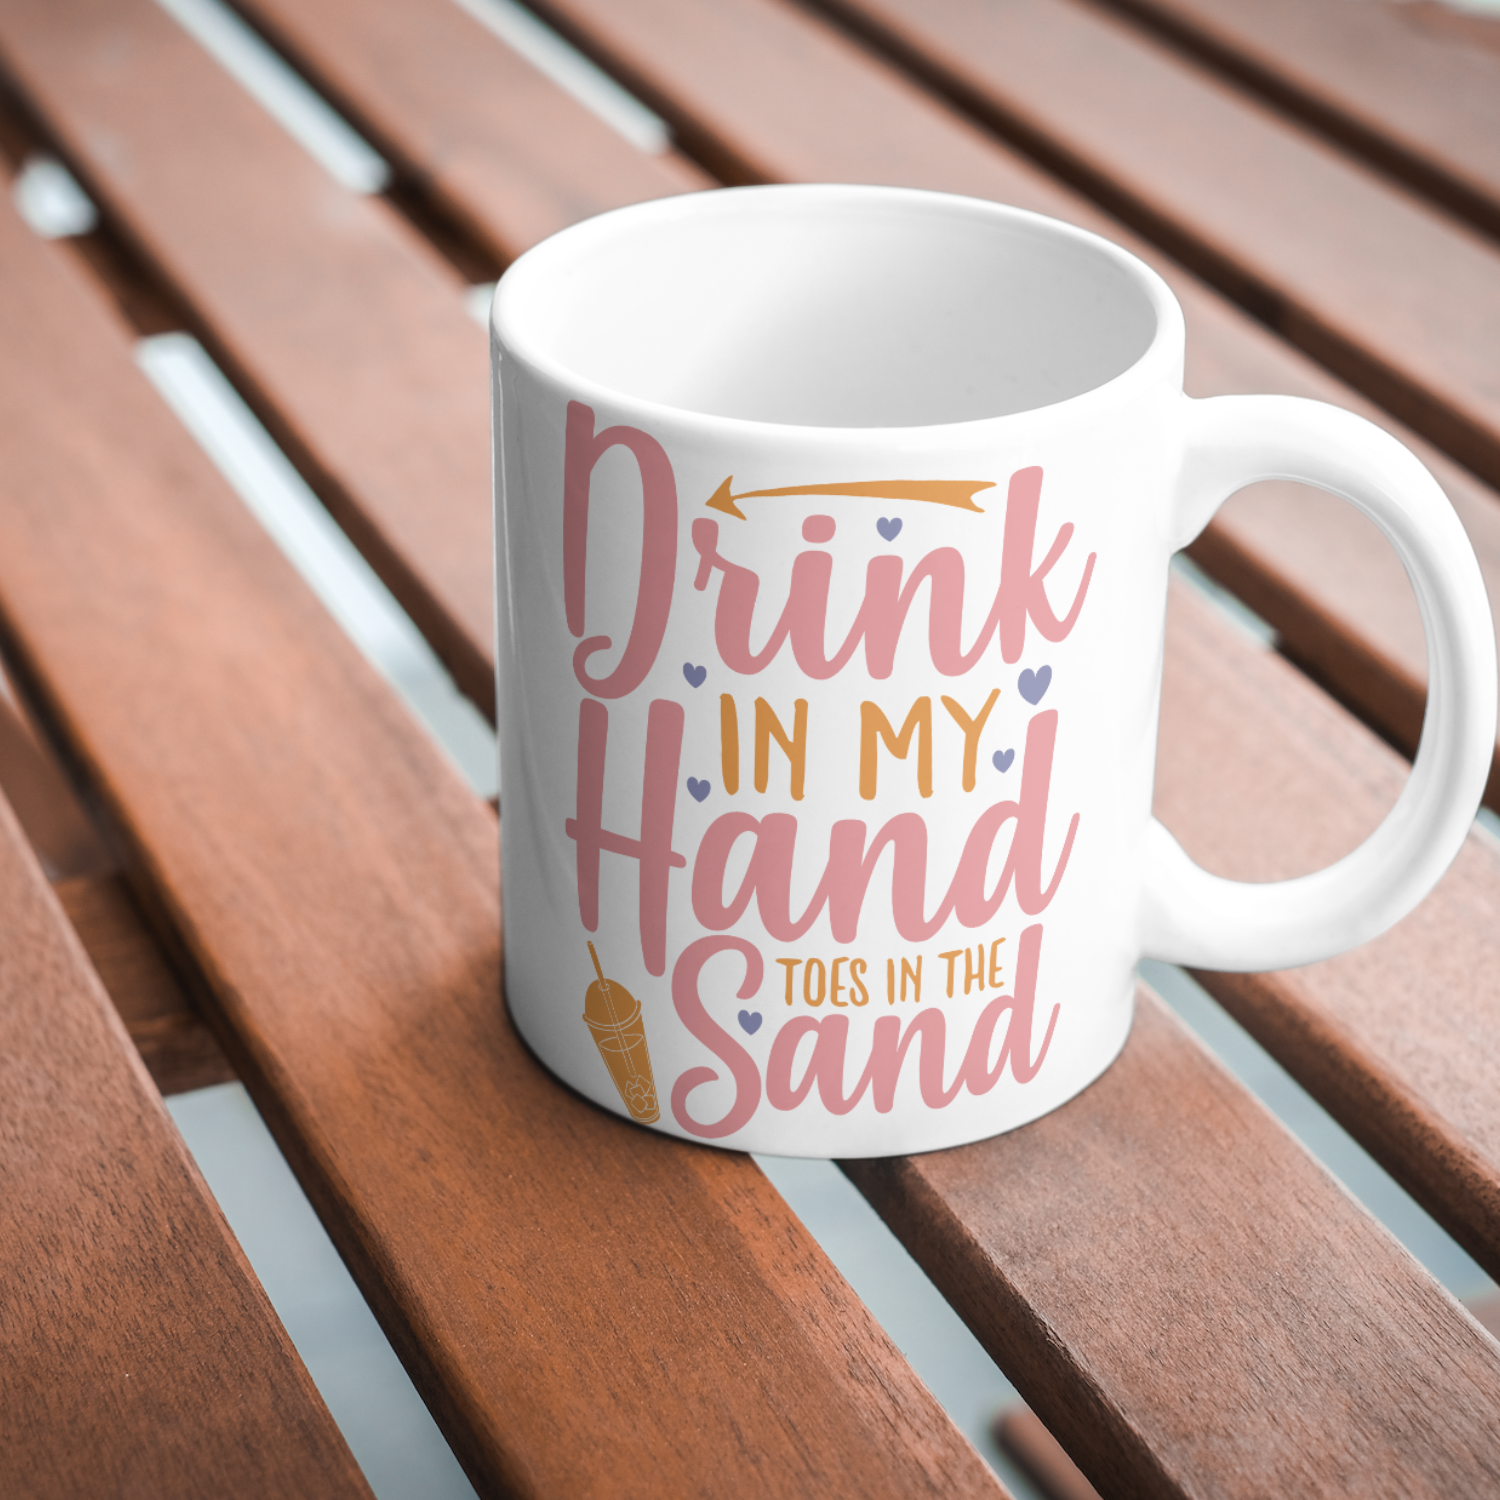 Drink in my hand in the toes sand SVG | Digital Download | Cut File | SVG - Only The Sweet Stuff